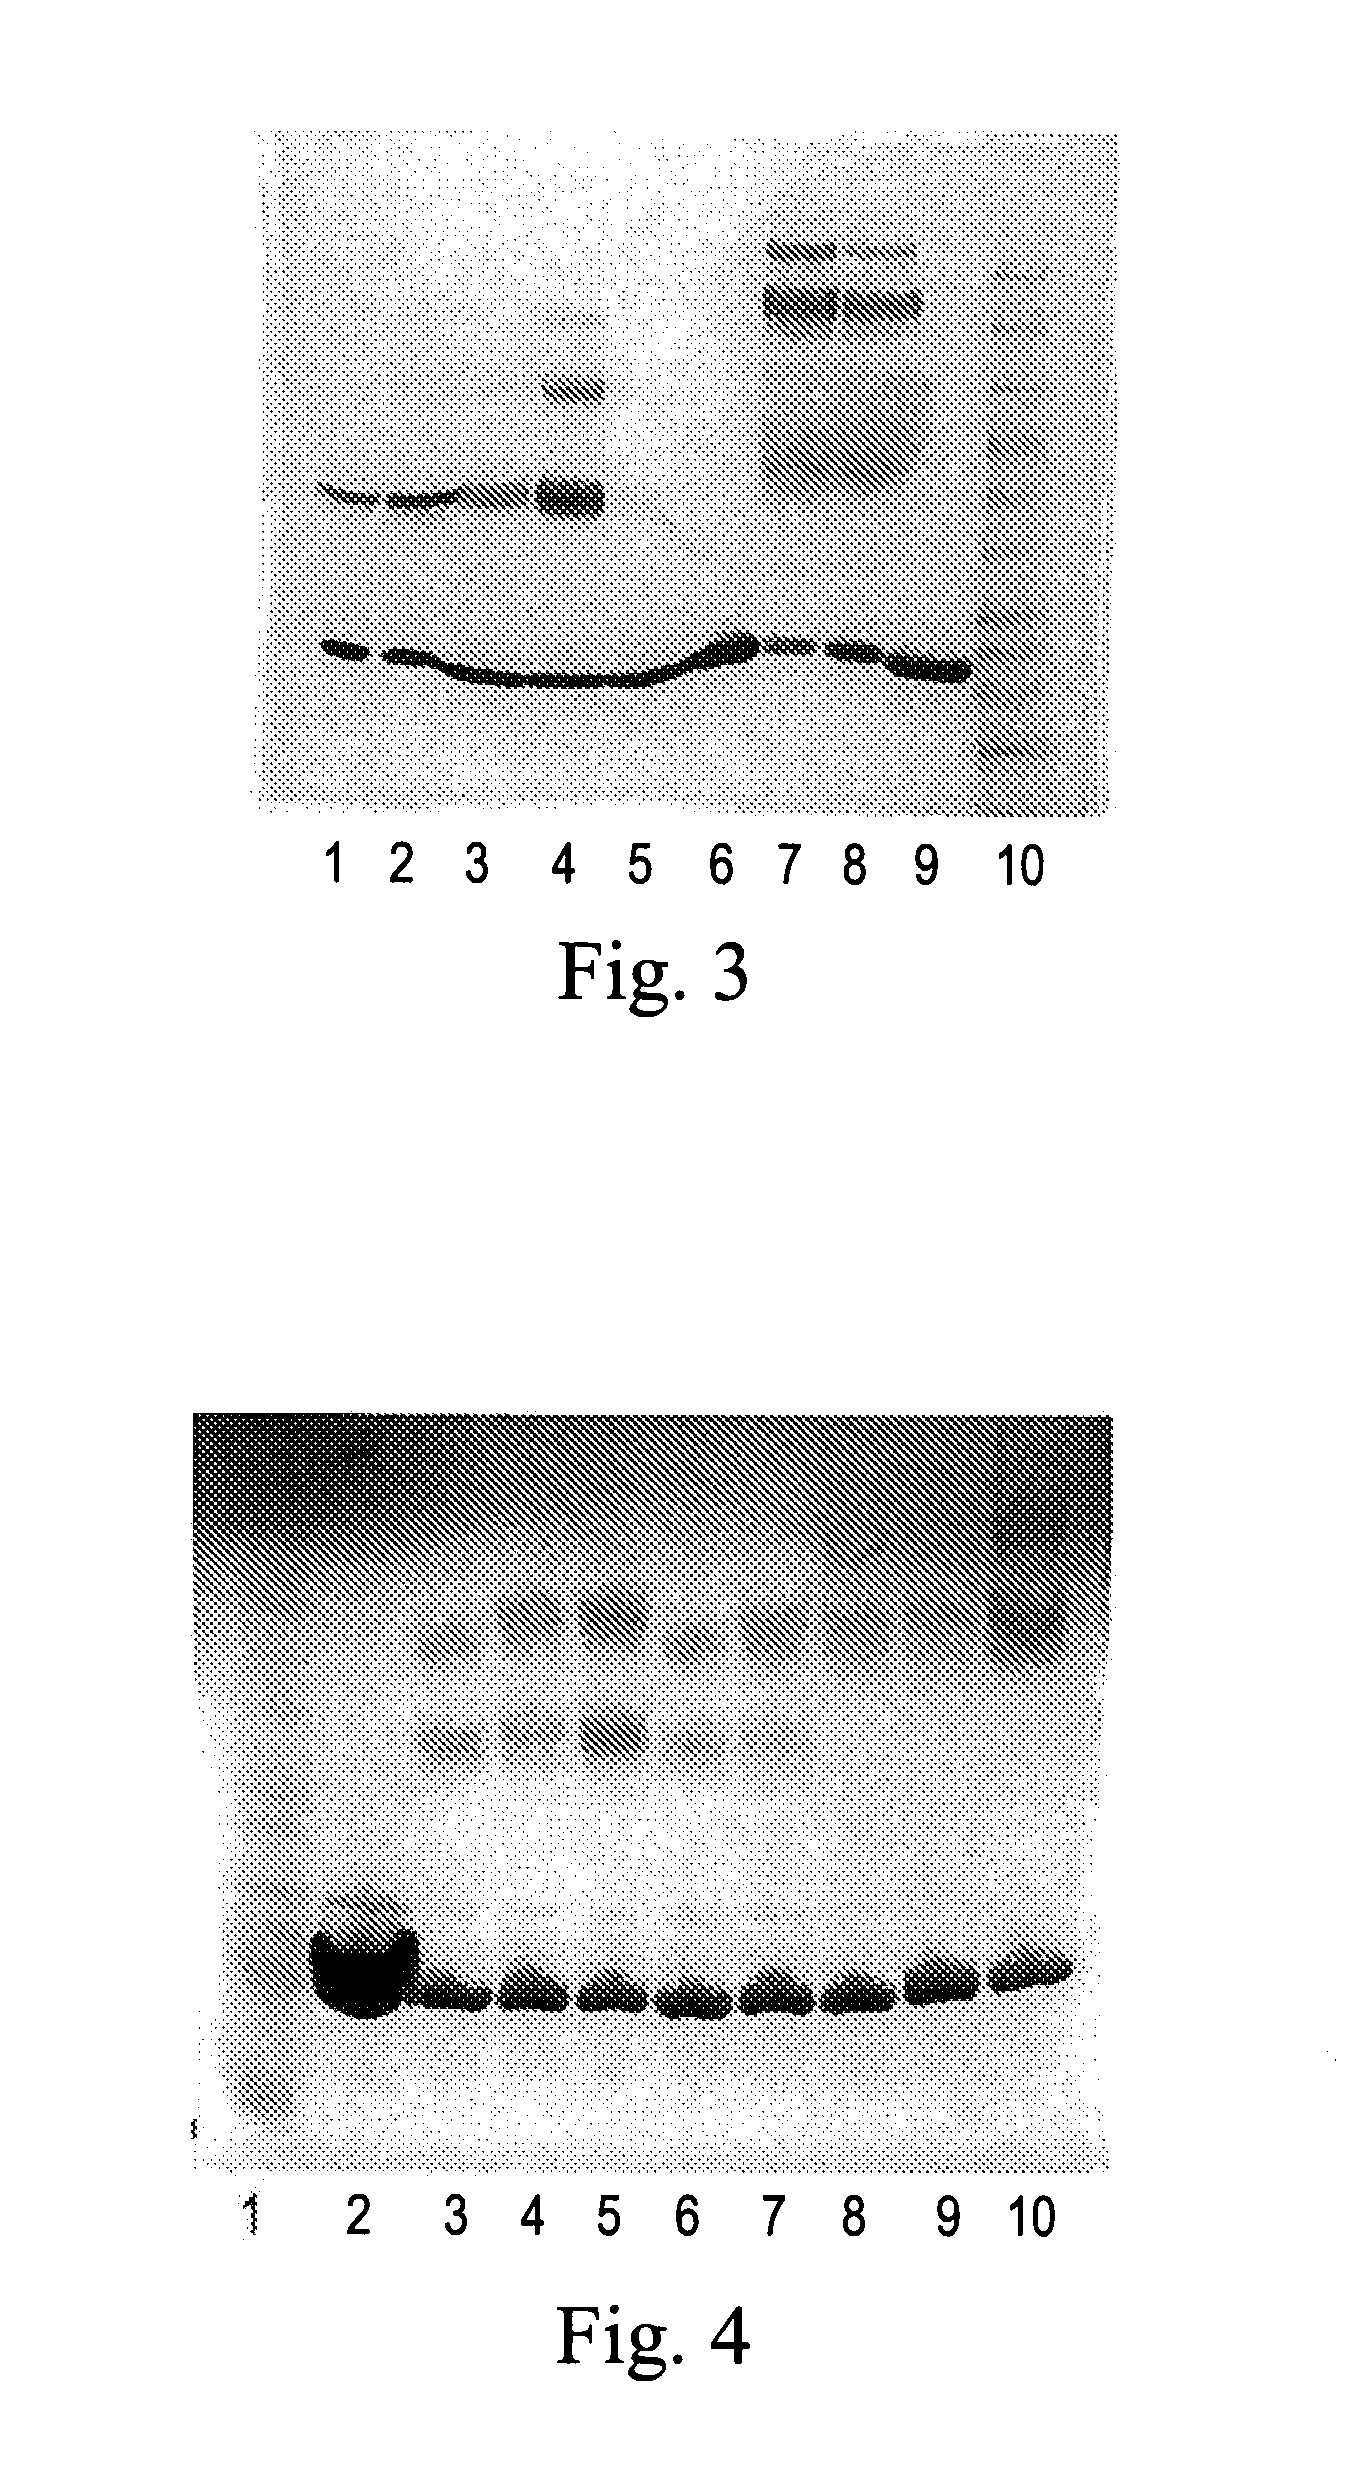 Polymeric alpha-hydroxy aldehyde and ketone reagents and conjugation method